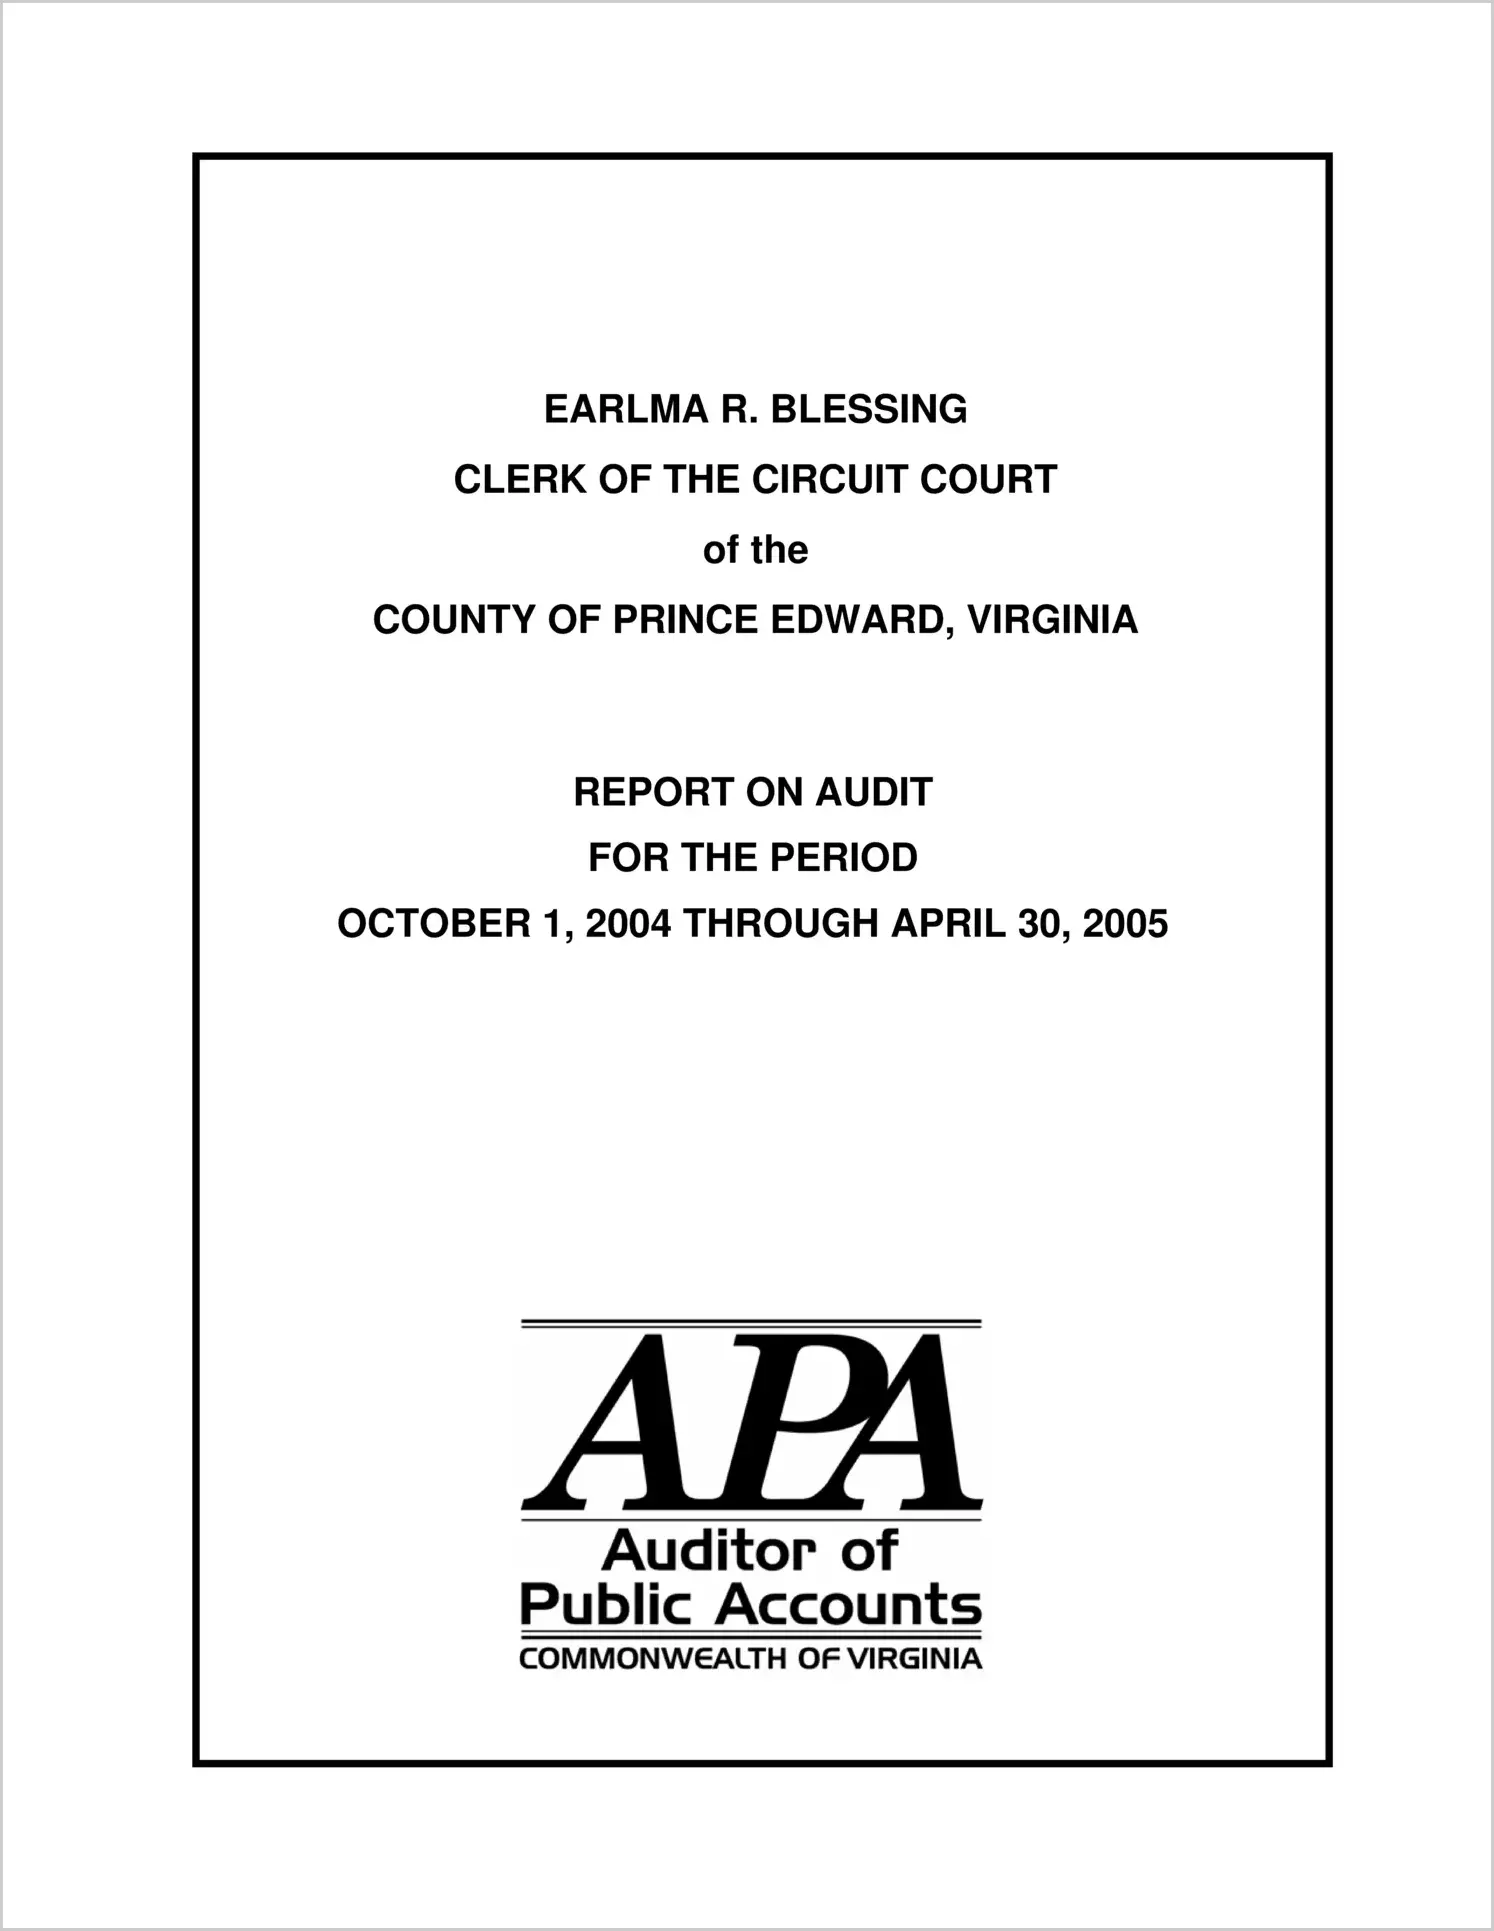 Clerk of the Circuit Court of the County of Prince Edward Turnover for the period October 1, 2004 through April 30, 2005